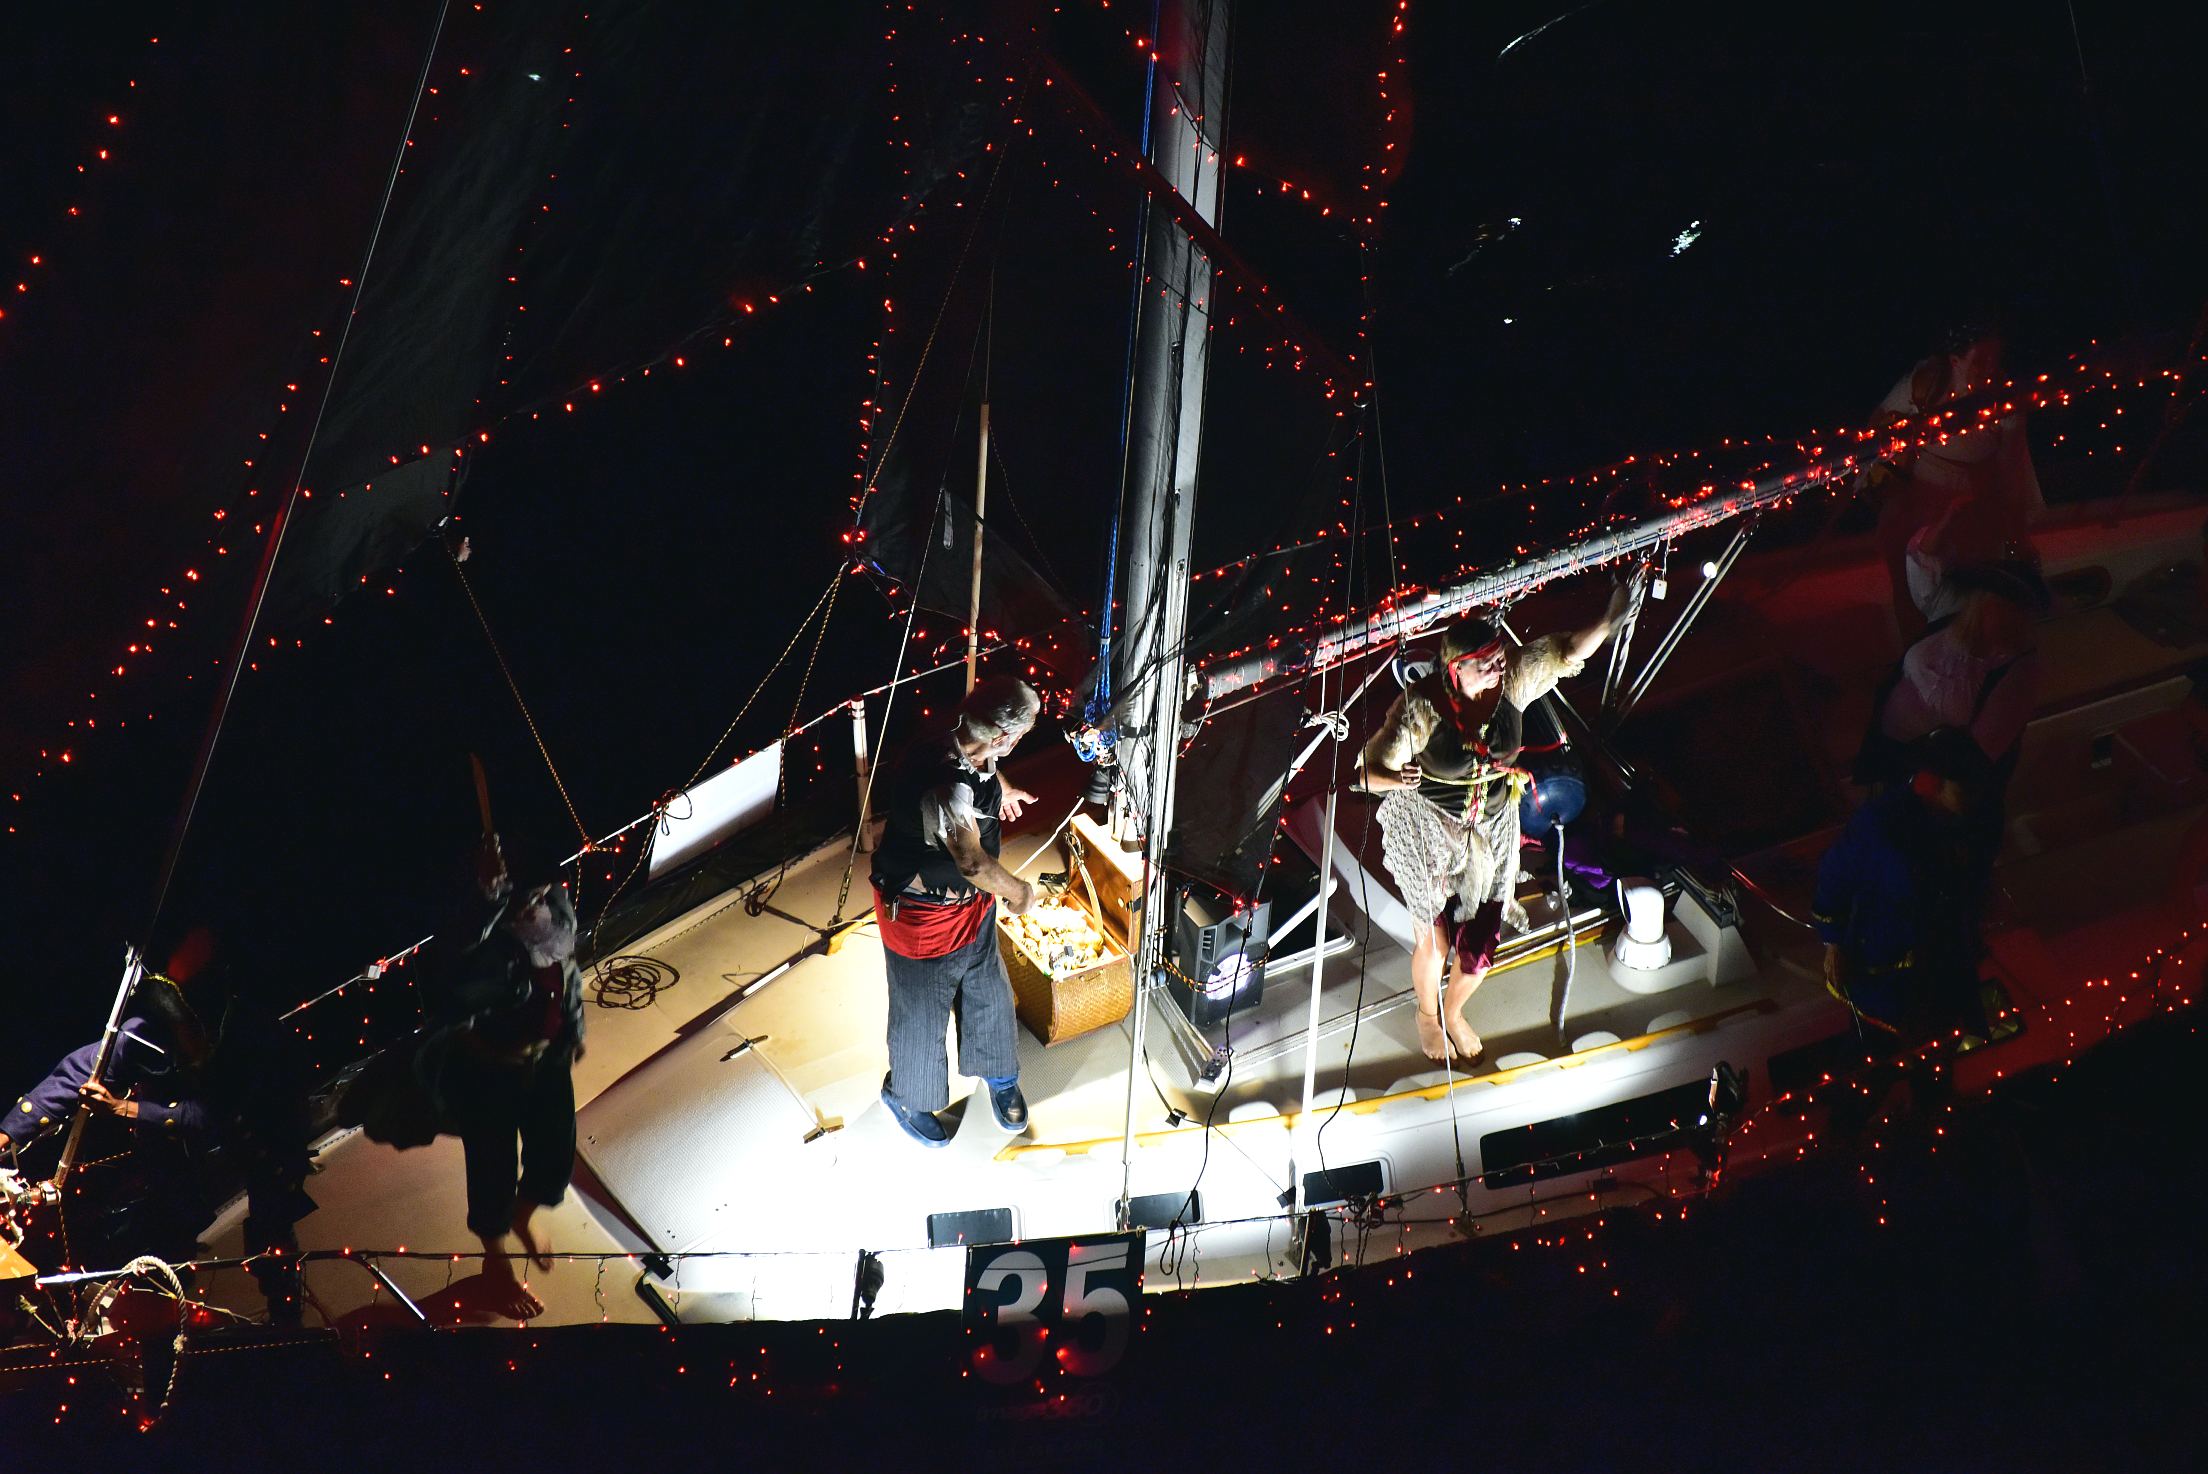 Navigator, boat number 35 in the 2021 Winterfest Boat Parade